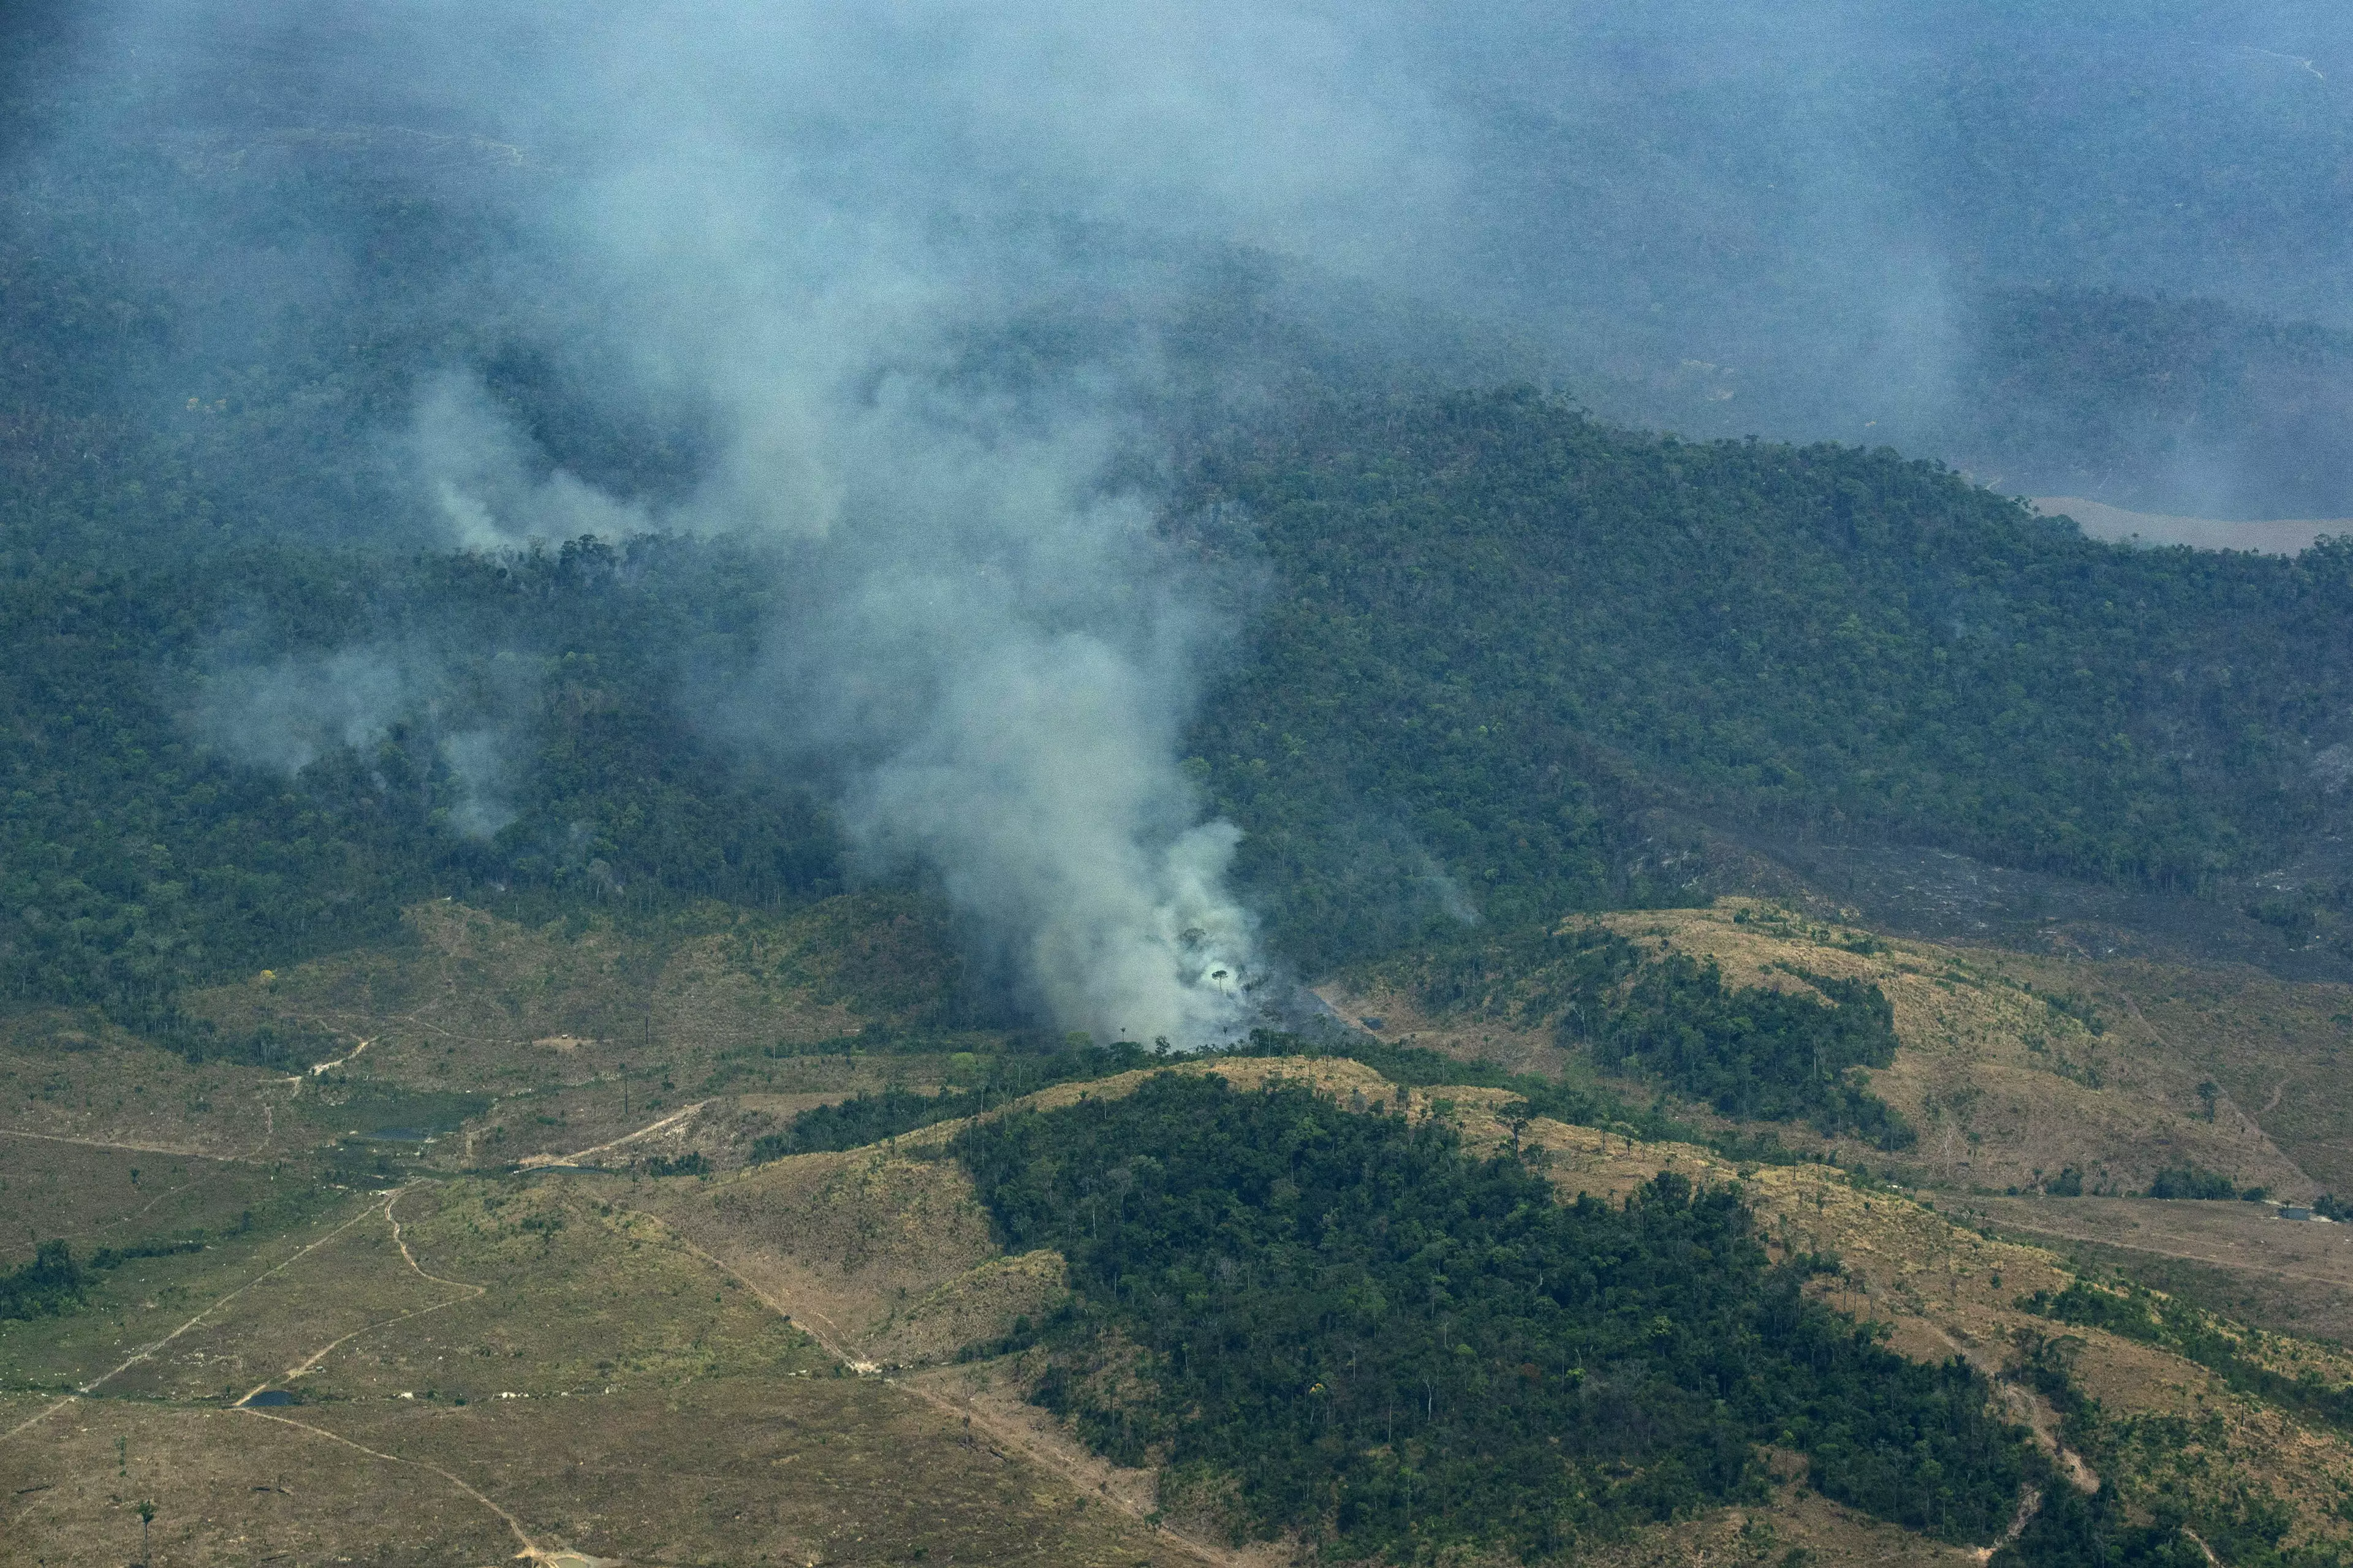 The fires pose a huge threat to the forest's indigenous people.